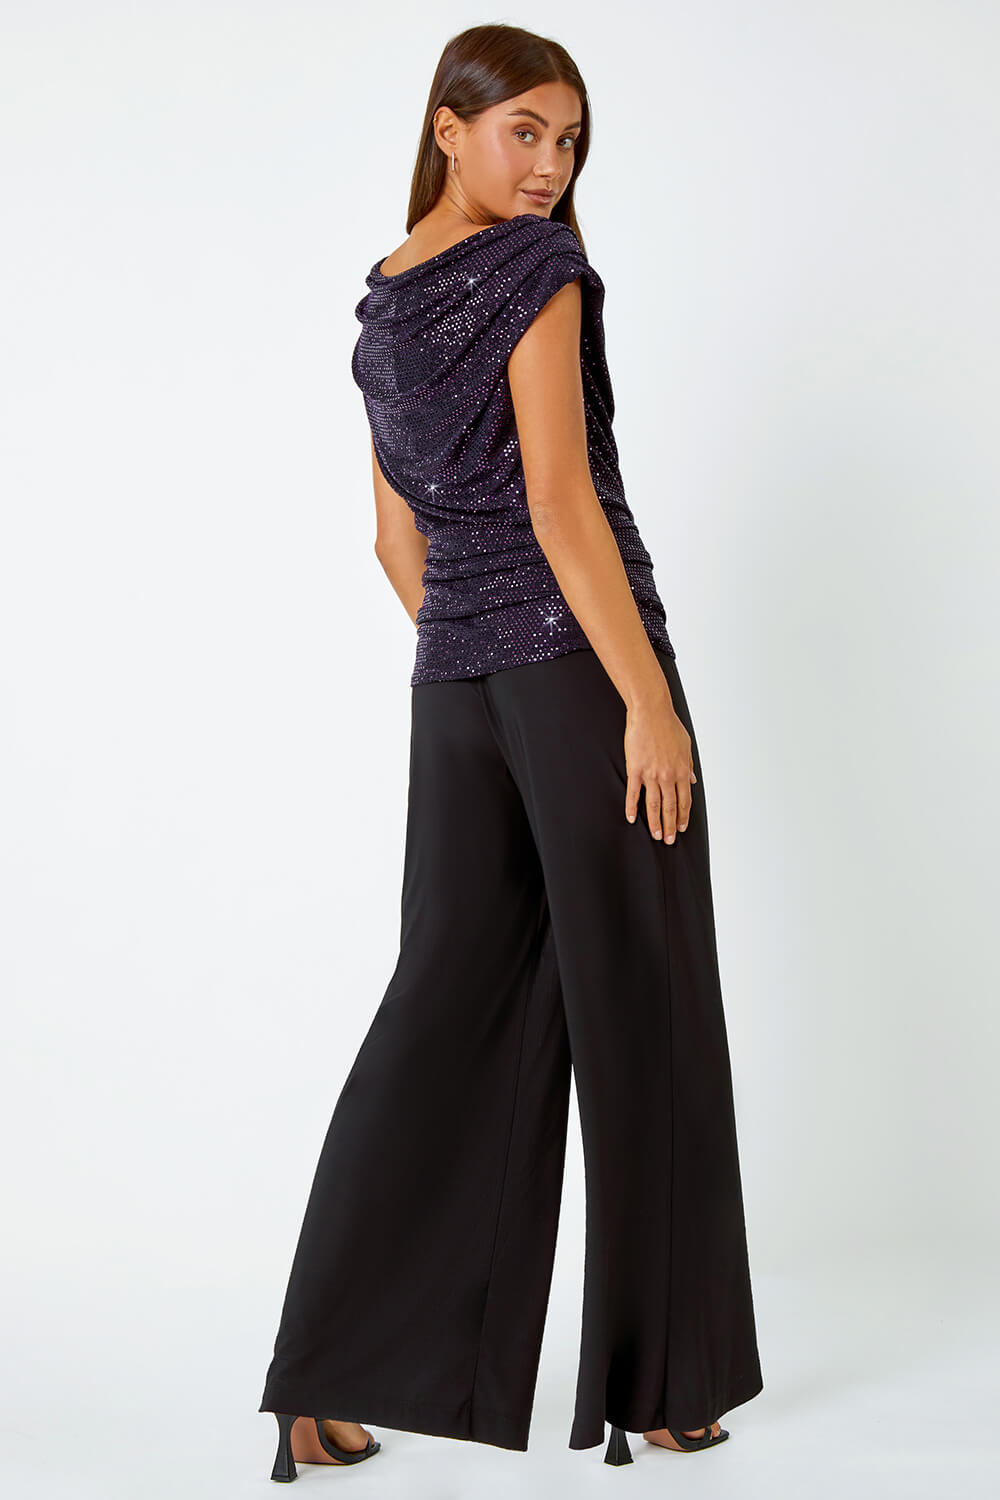 Purple Ruched Sequin Wide Leg Stretch Jumpsuit, Image 3 of 5